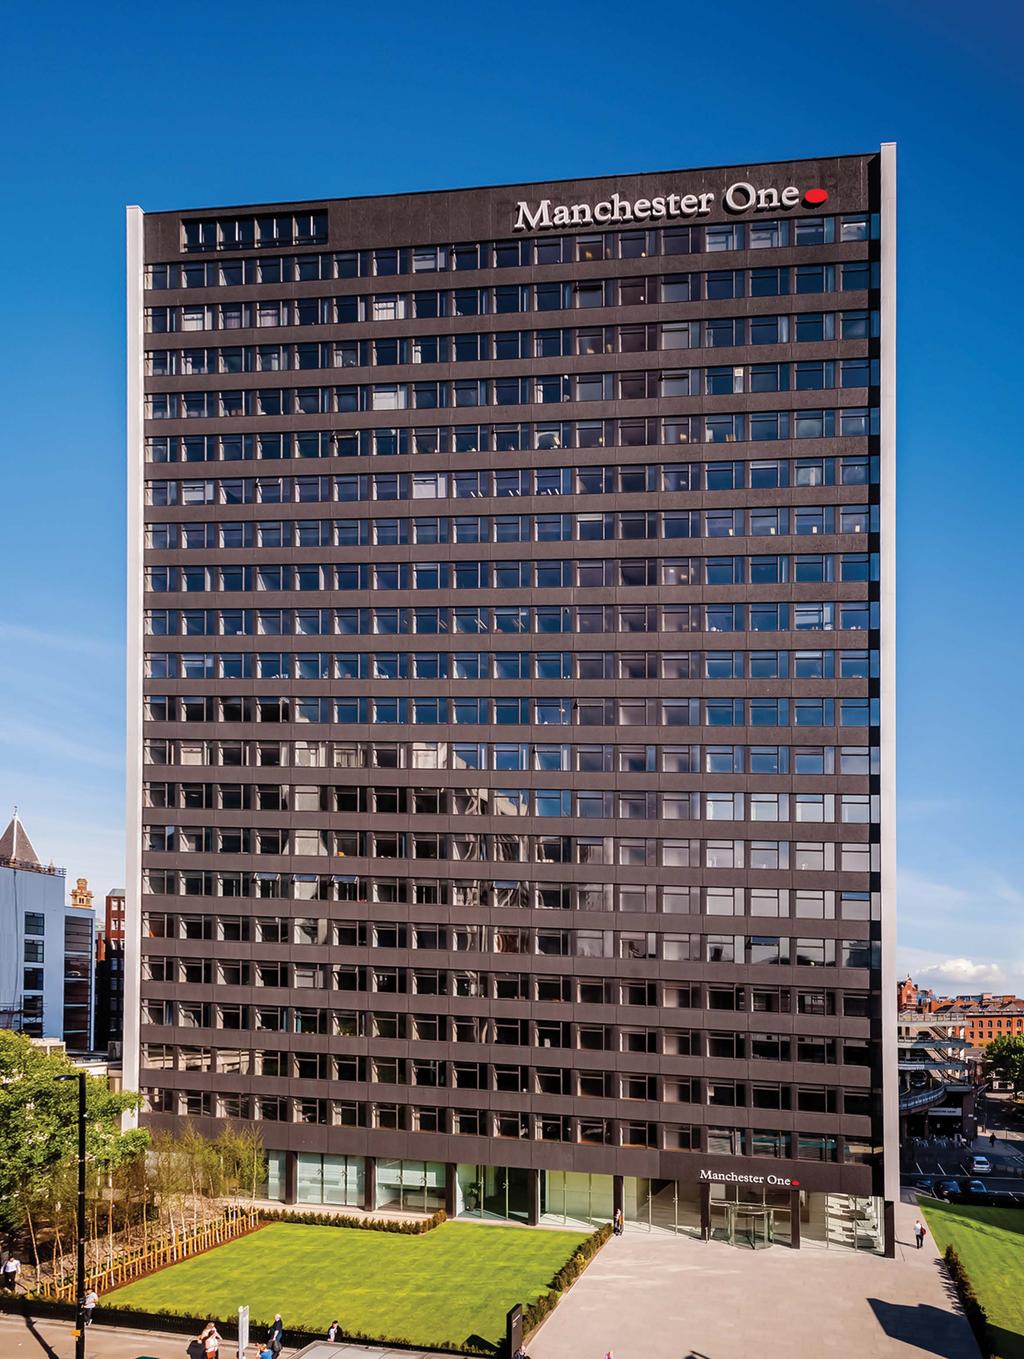 Make the most of Manchester We invested over 2m to redevelop the 2-storey Manchester One to create a highly sophisticated city centre working environment with a sought-after M postcode.